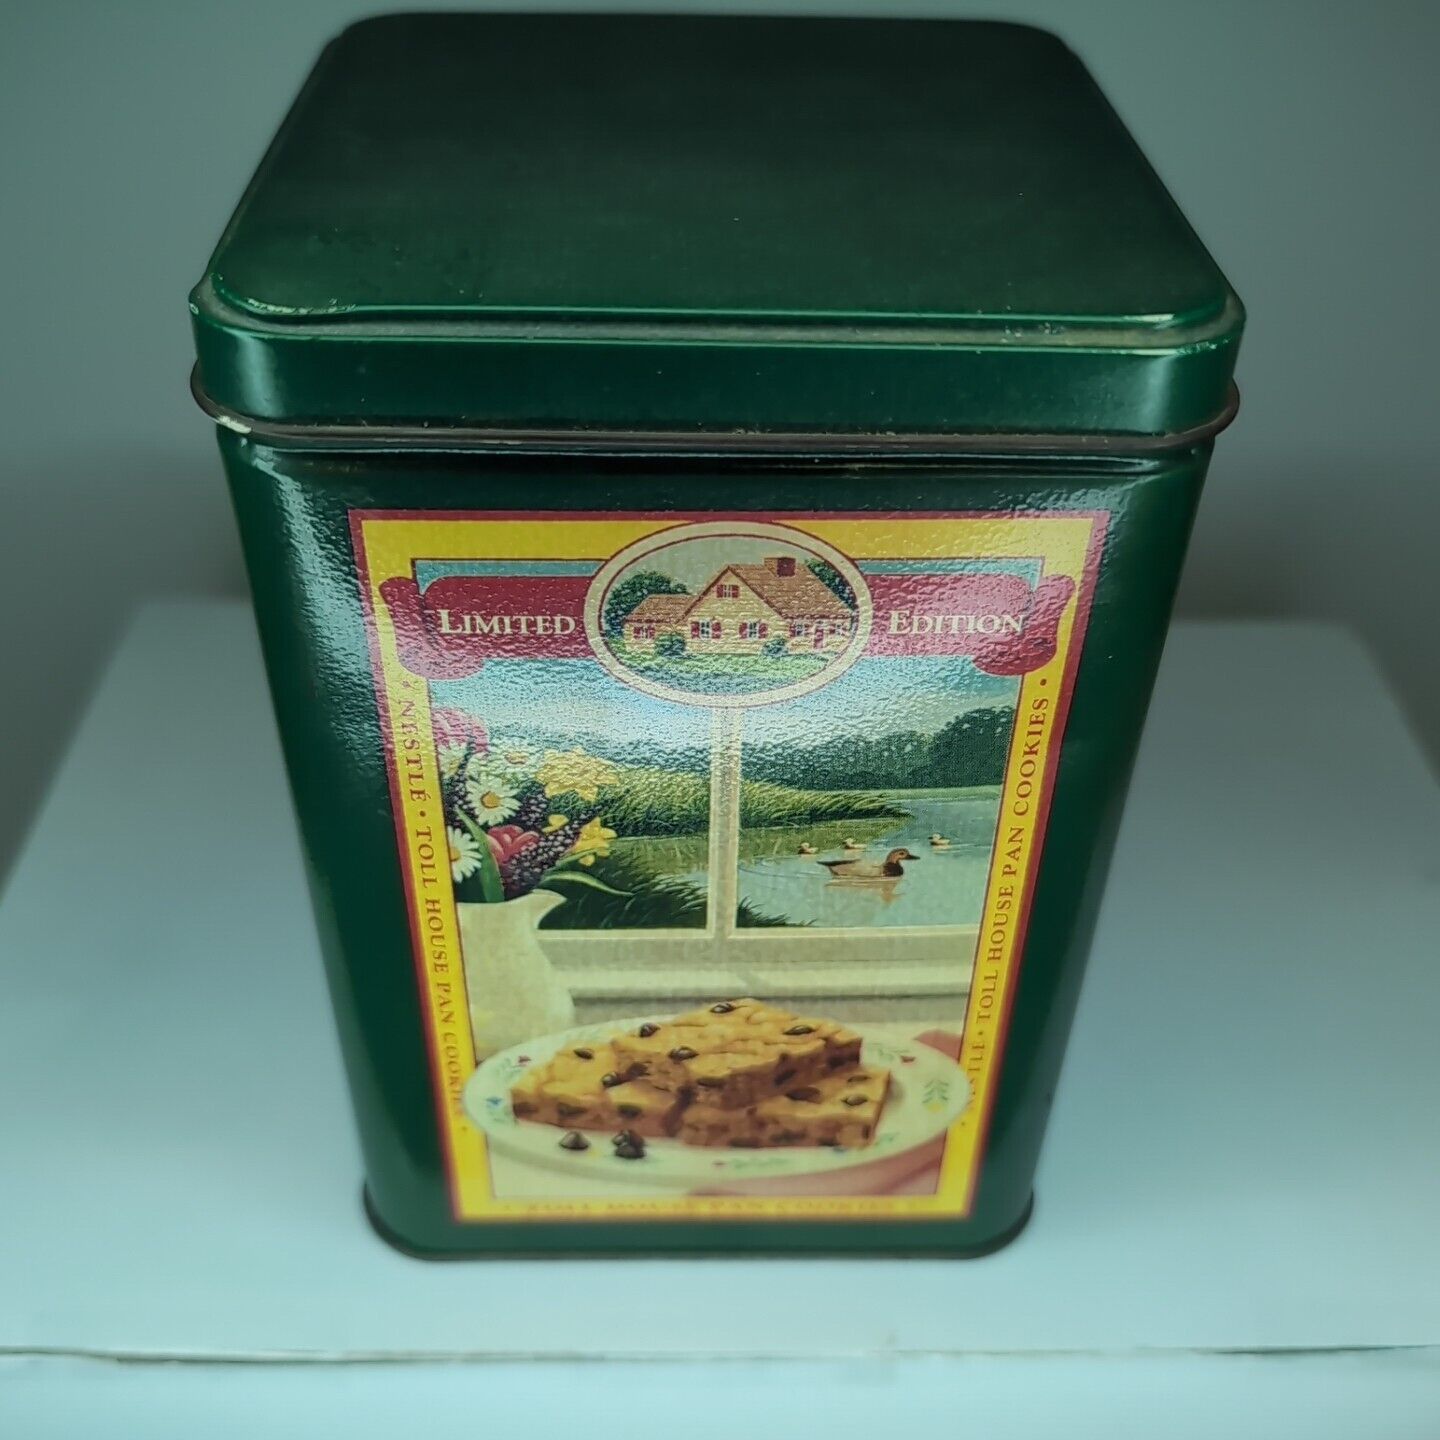 Old Vintage Nestle Toll House Cookies Metal Tin Can Green- Limited Edition